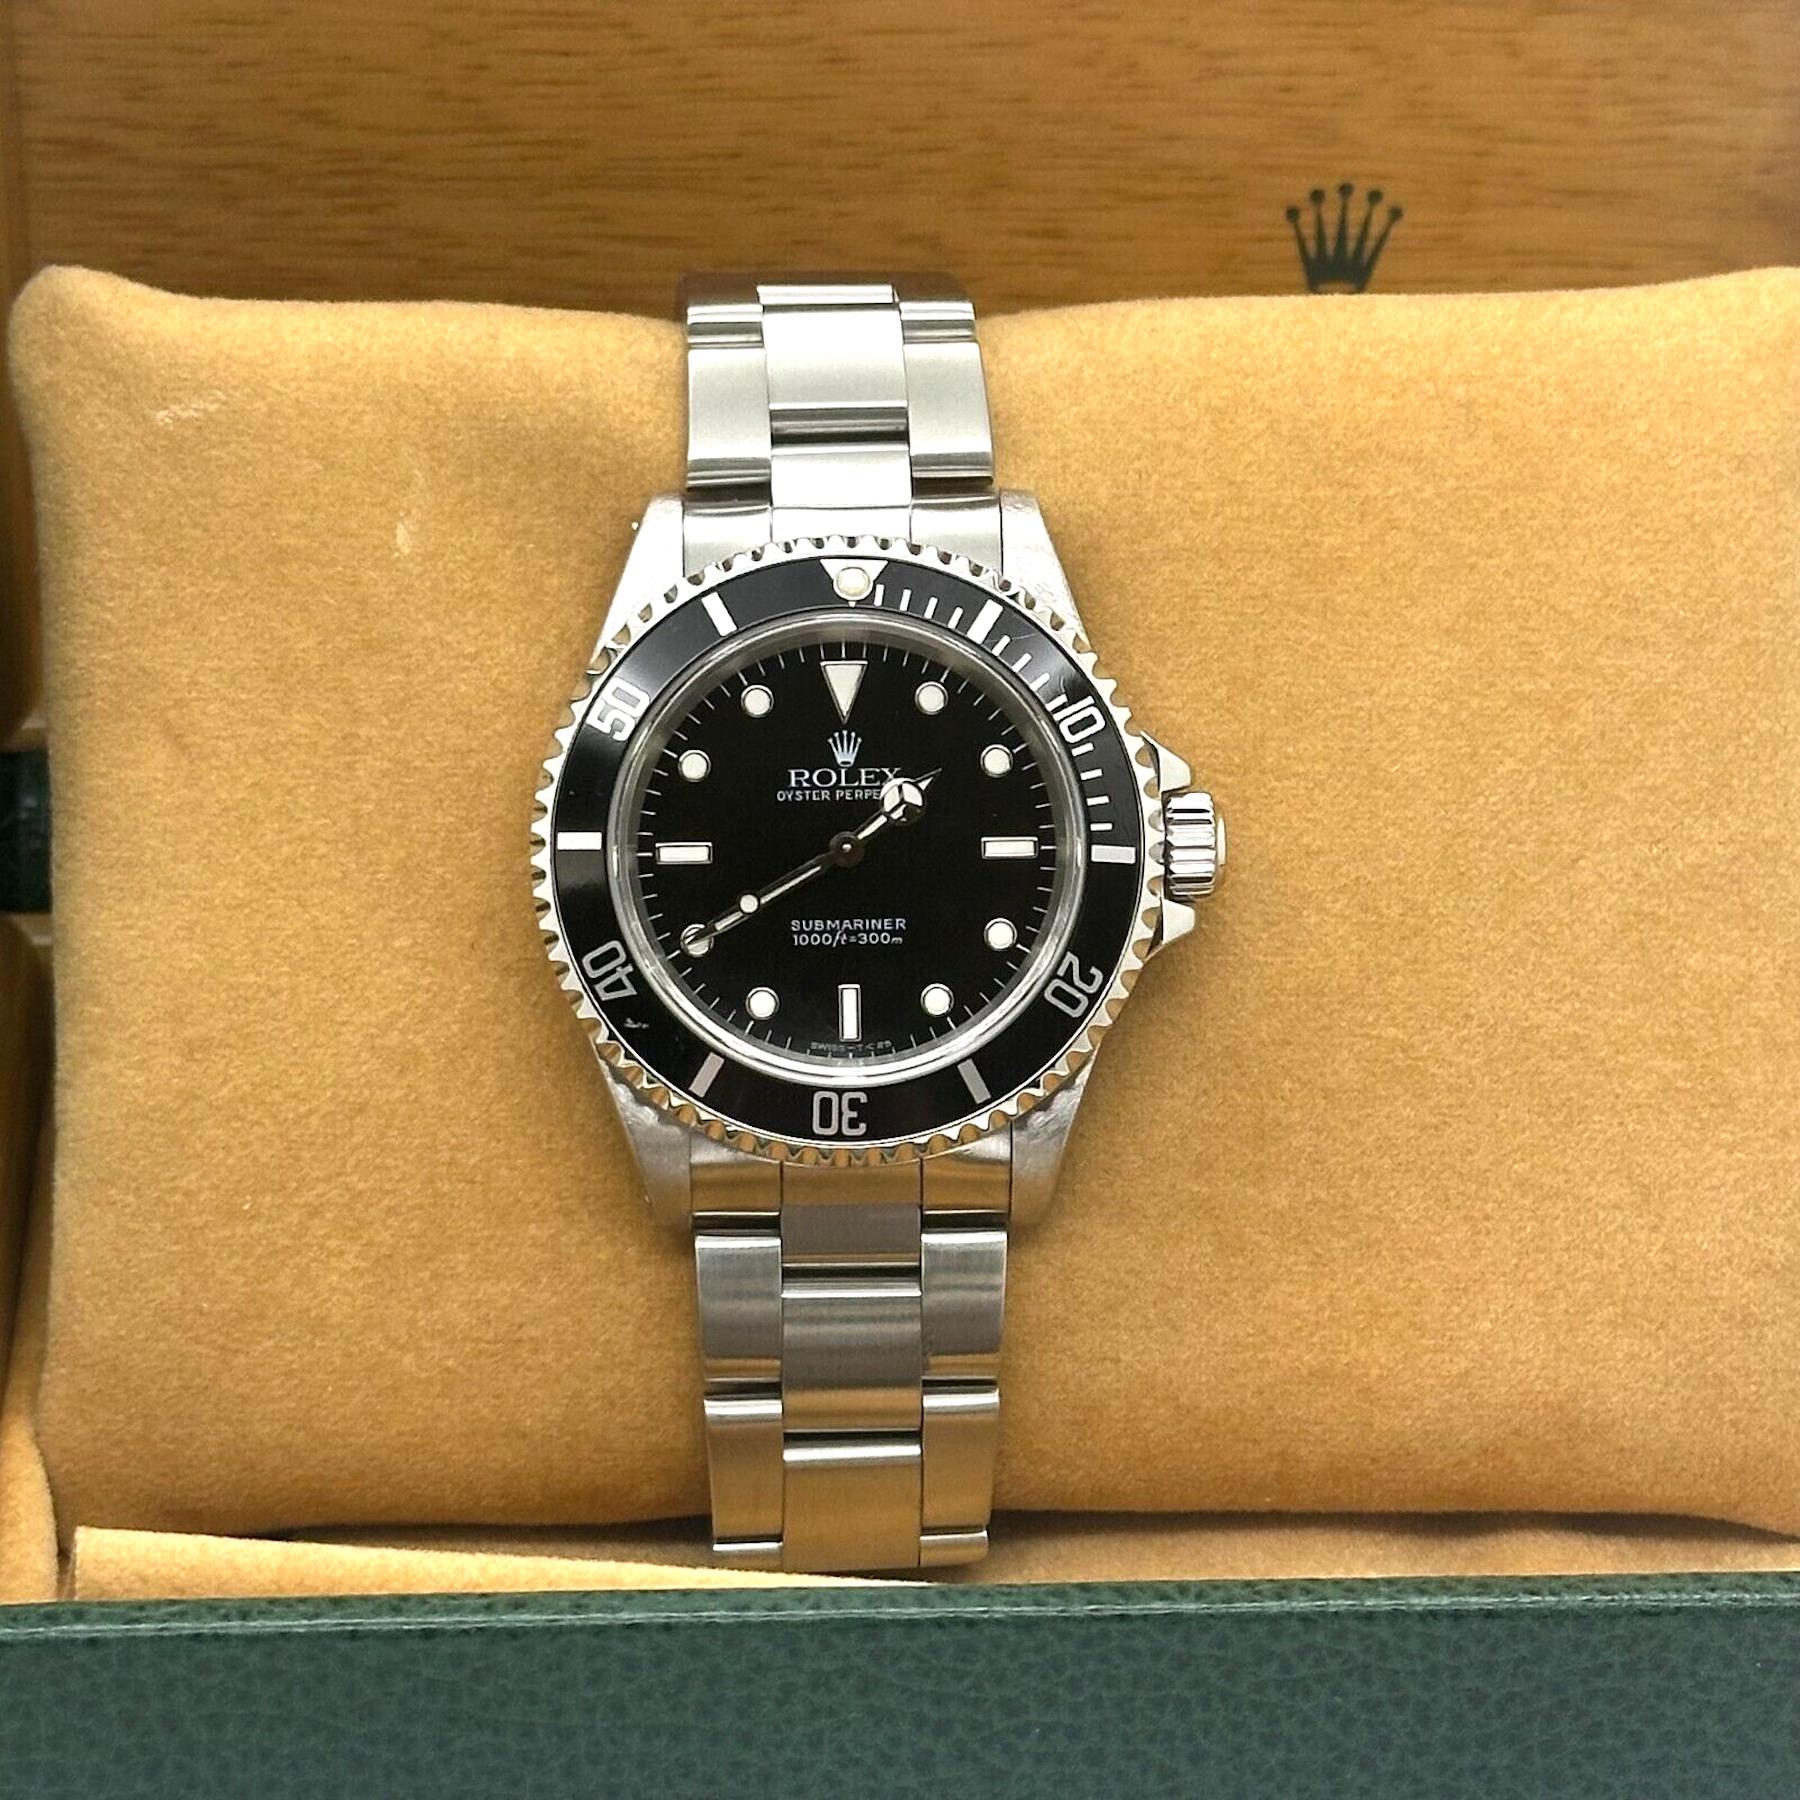 Rolex 14060 Submariner Black Dial Stainless Steel Box 3